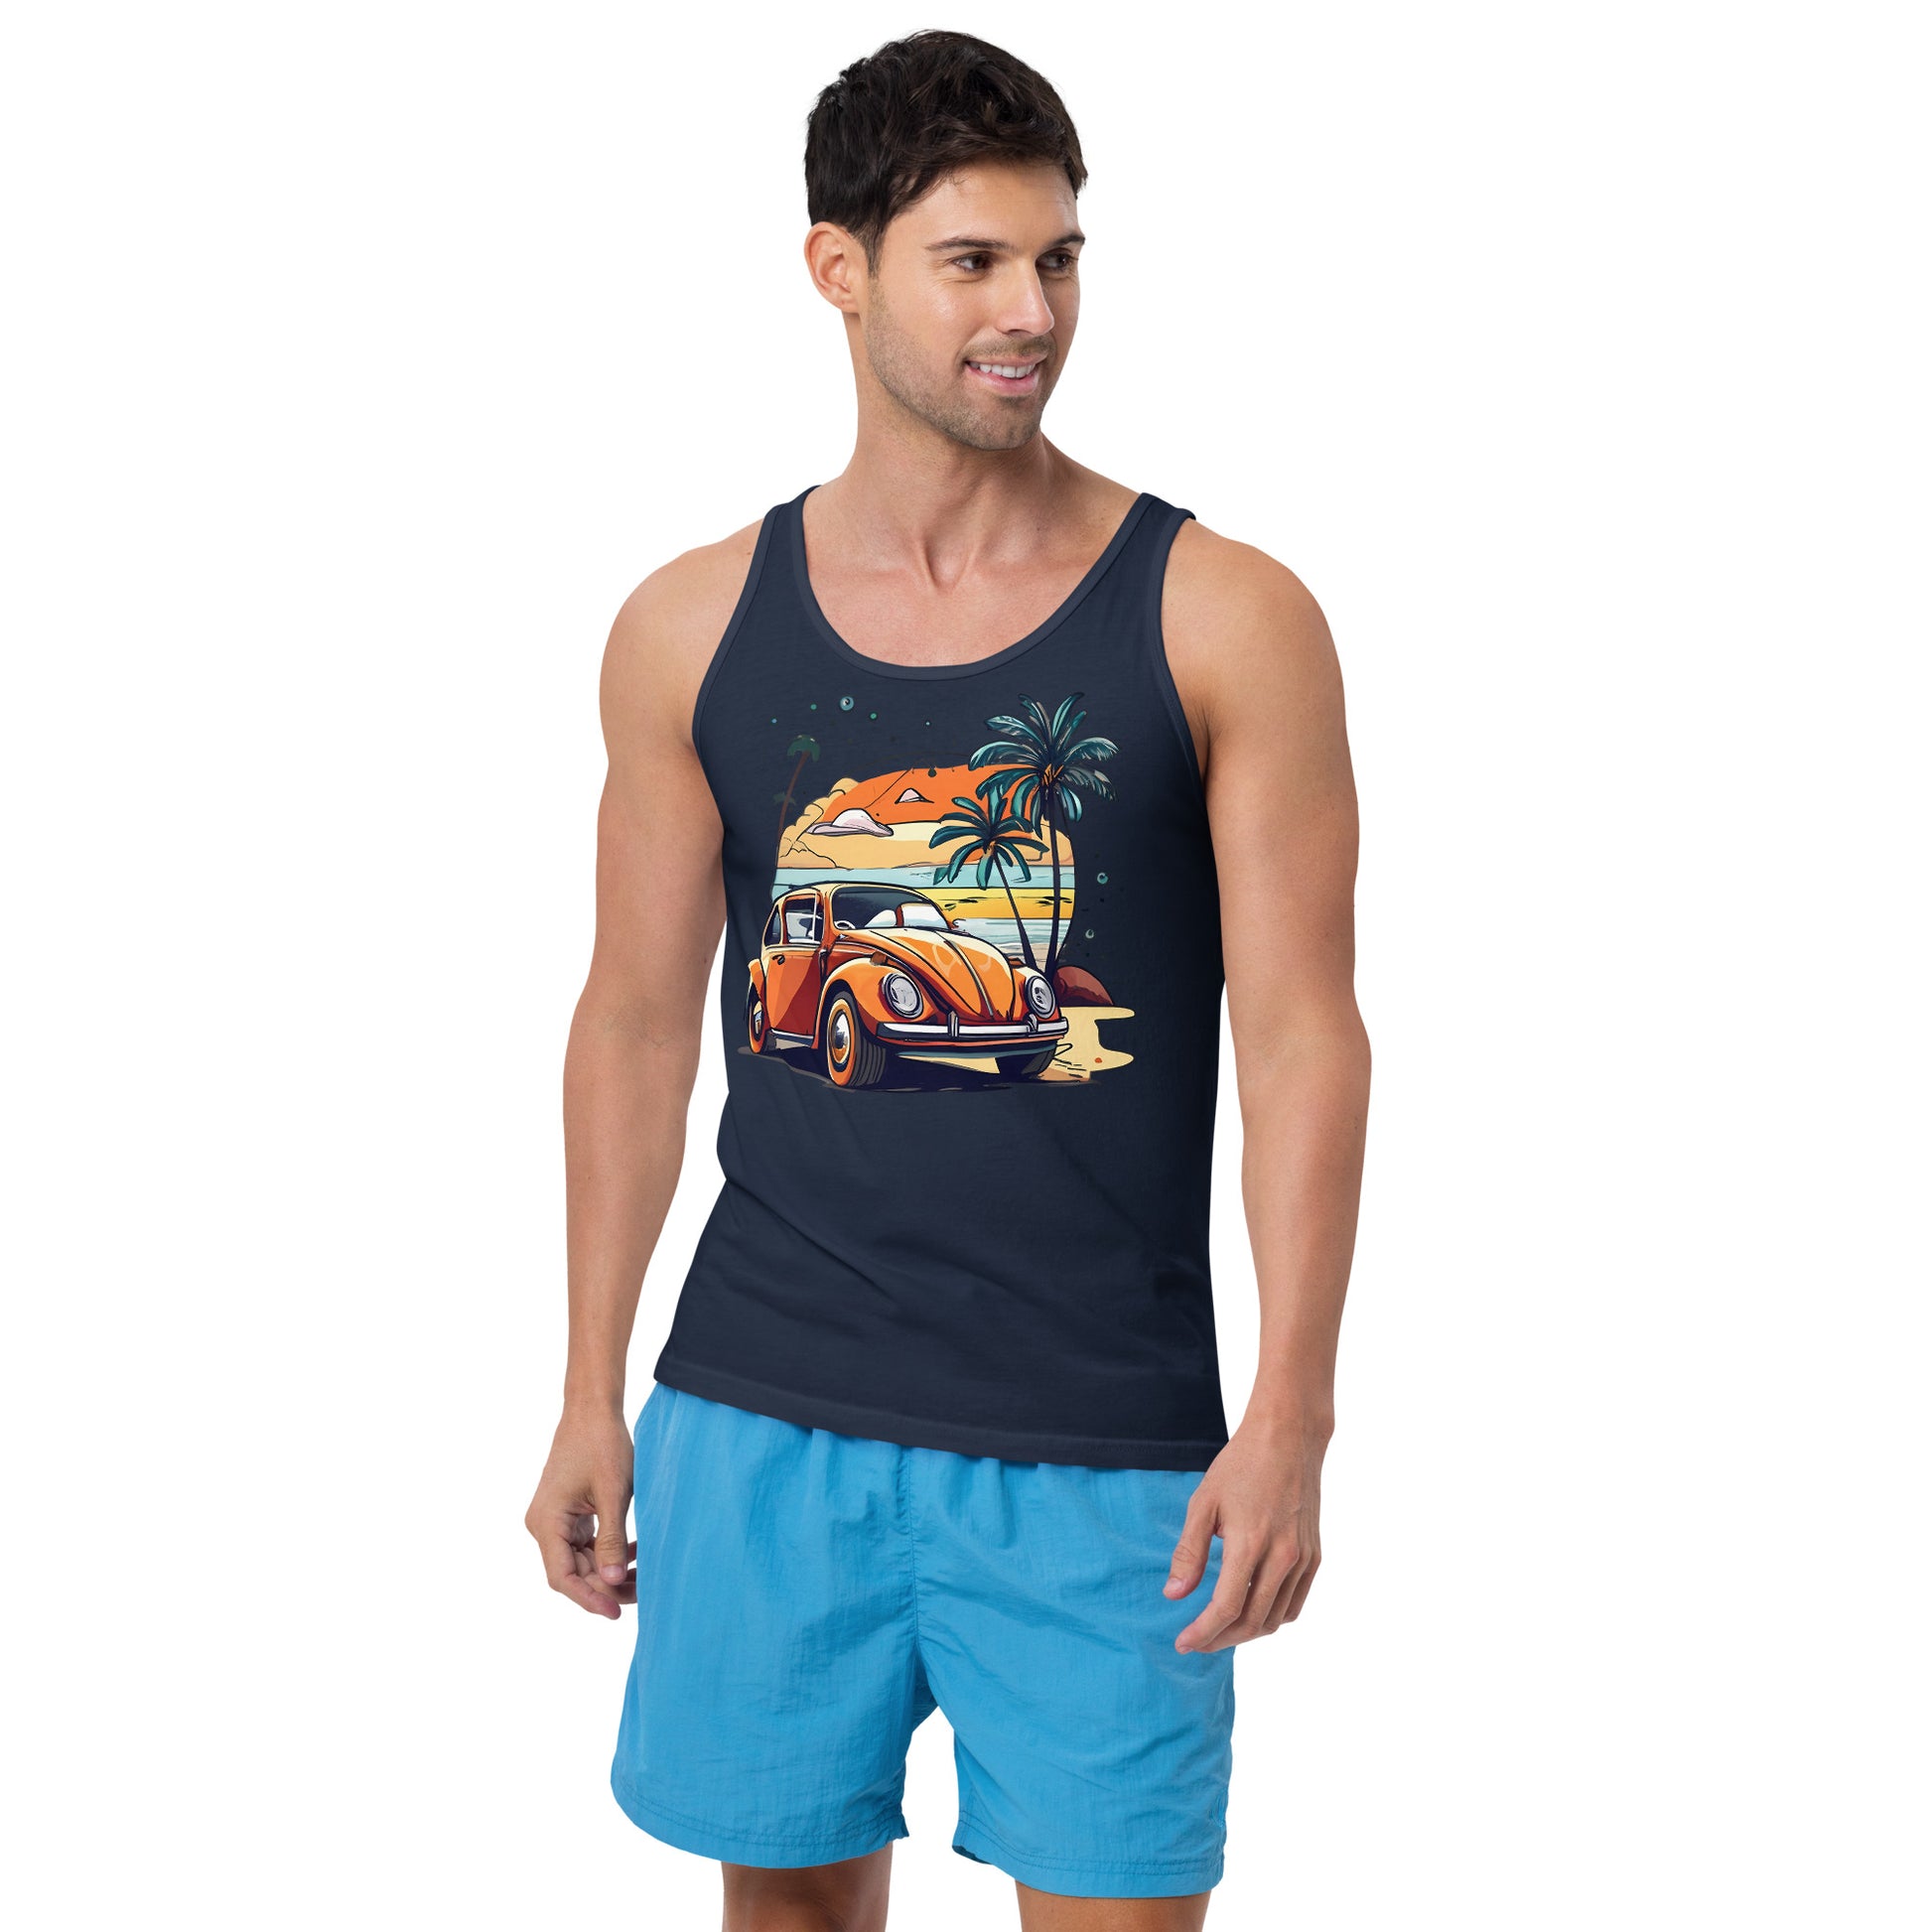 man with navy blue tank top with picture of beetle car in front of palm trees 